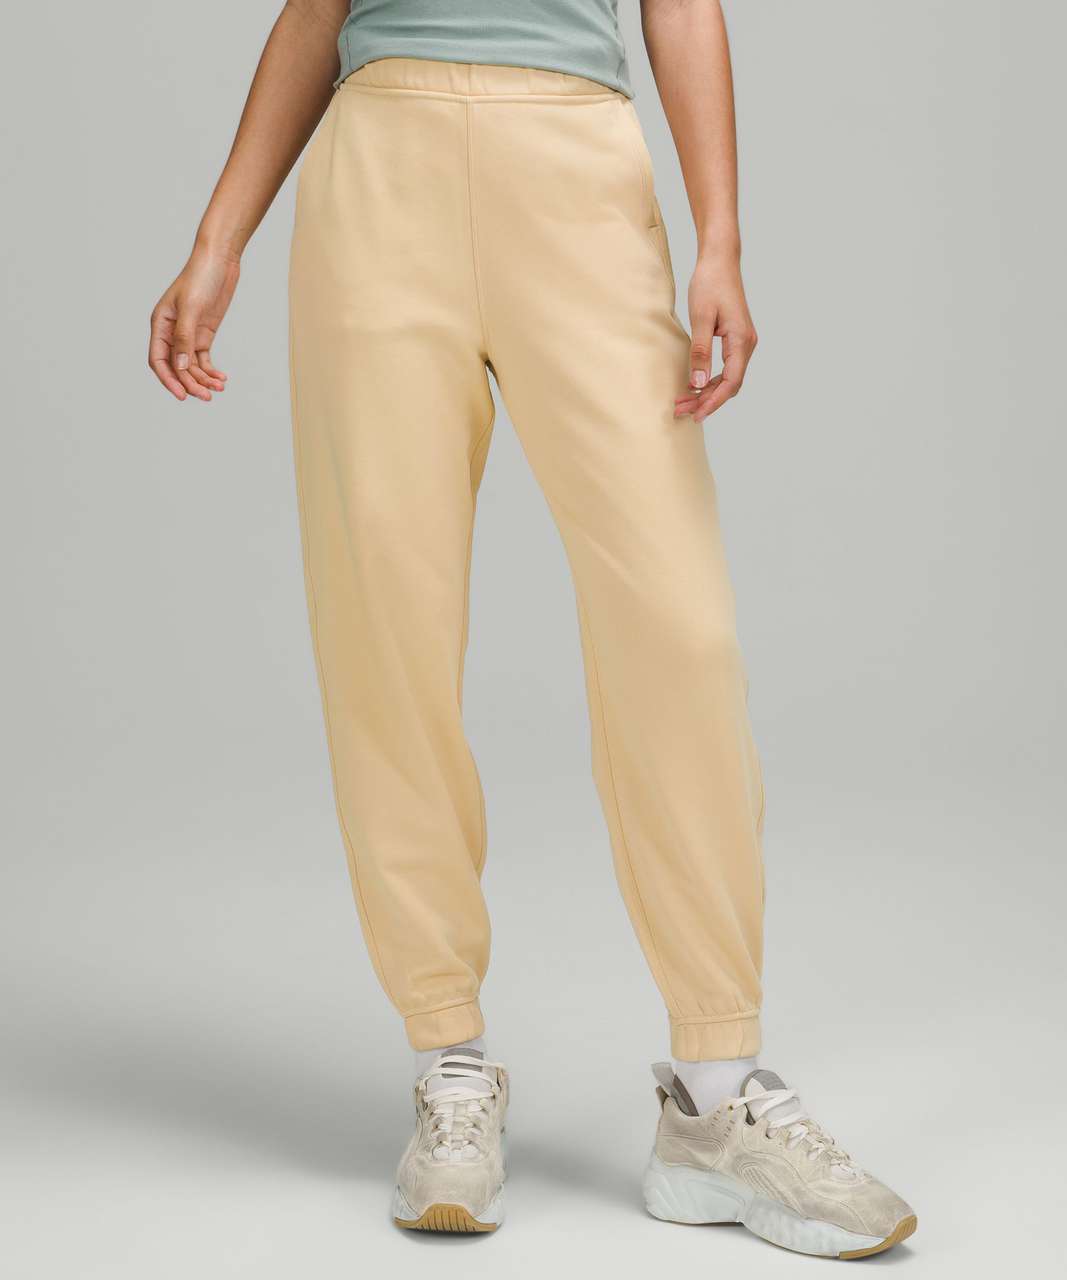 Lululemon Relaxed High-Rise Jogger - Prosecco